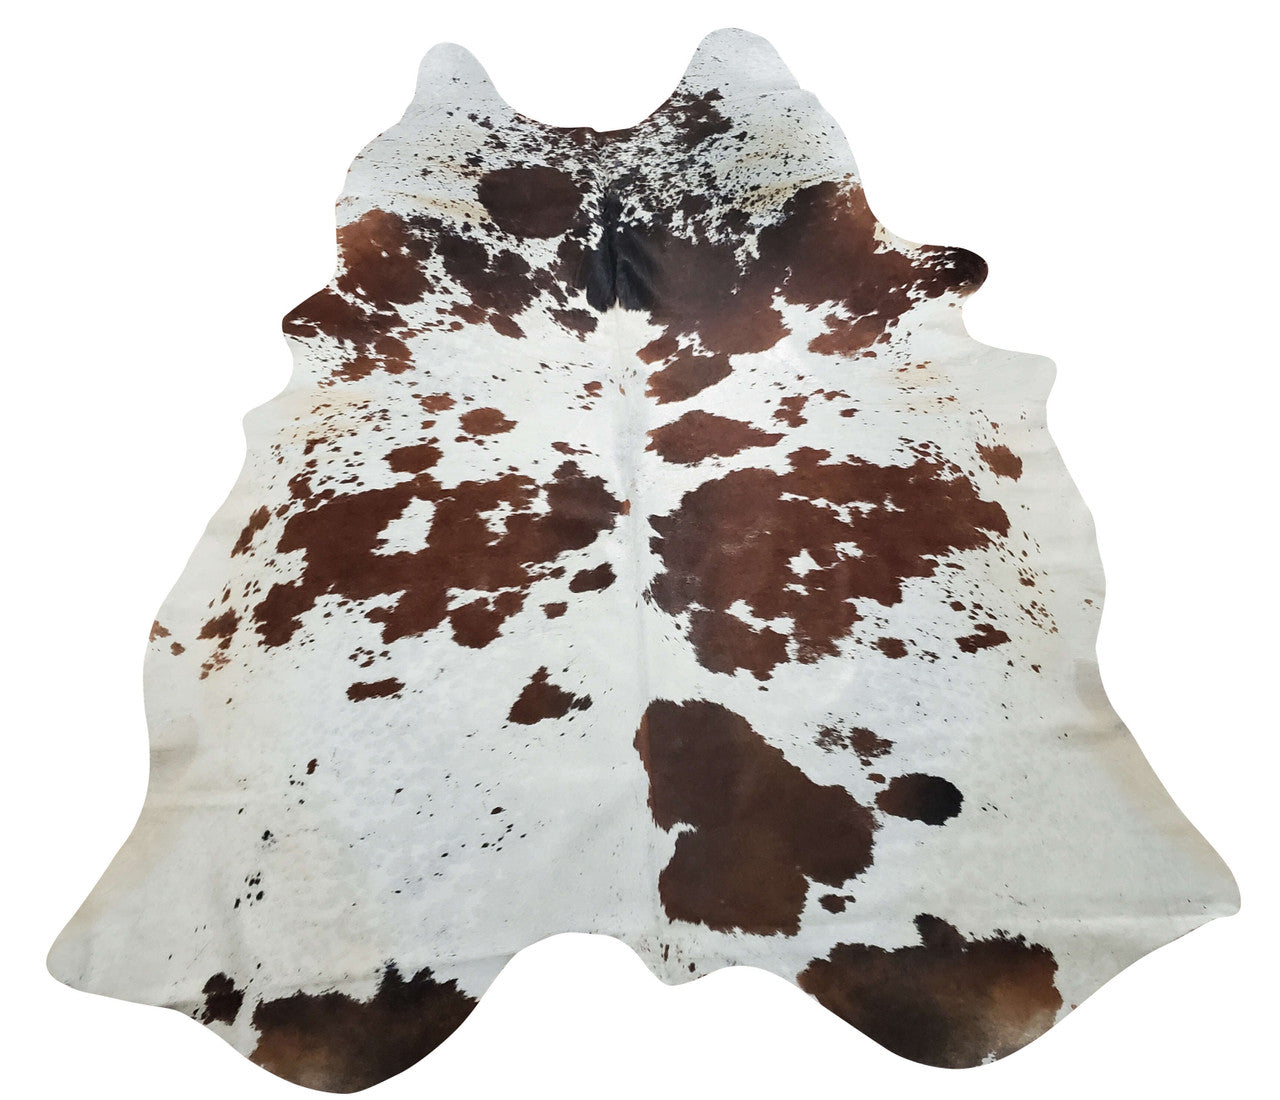 Spotted brown and white cowhide rug will give a more transitional look to dining room, the size is perfect to go under the table. 